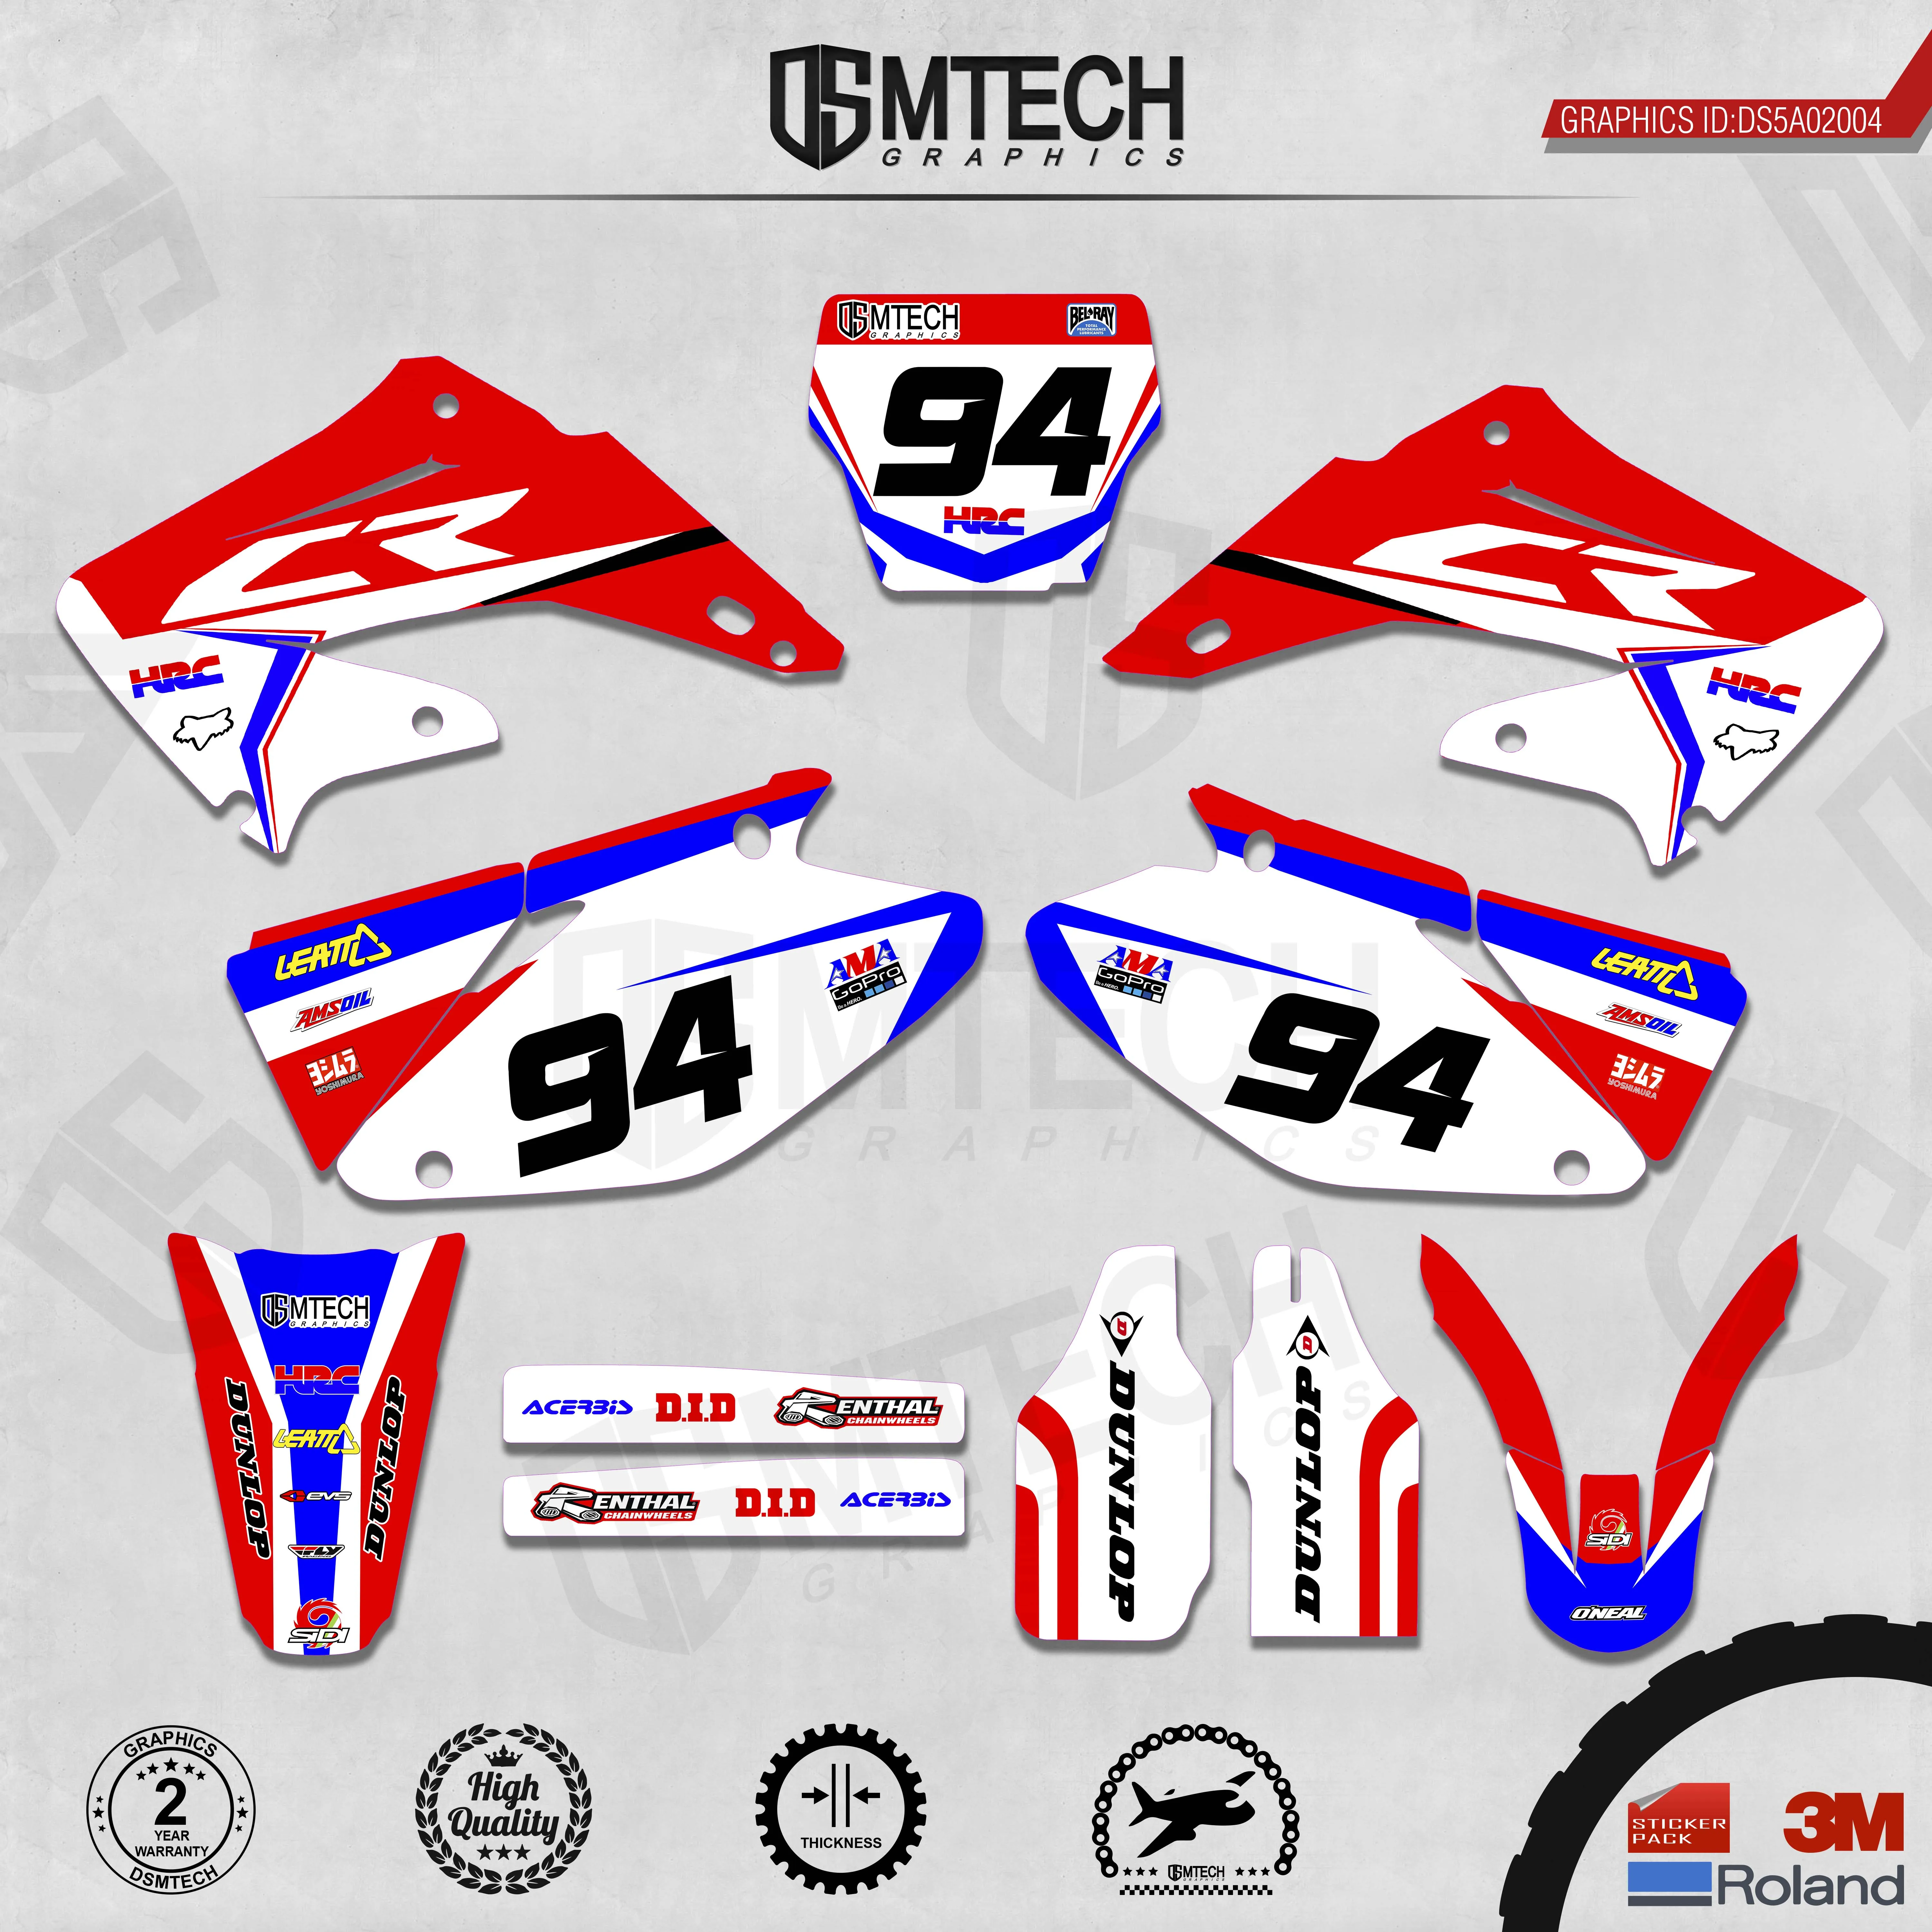 DSMTECH Customized Team Graphics Backgrounds Decals 3M Custom Stickers For 2002-2004 2005-2007 2008-2010 2011-2012 CR125-250 004